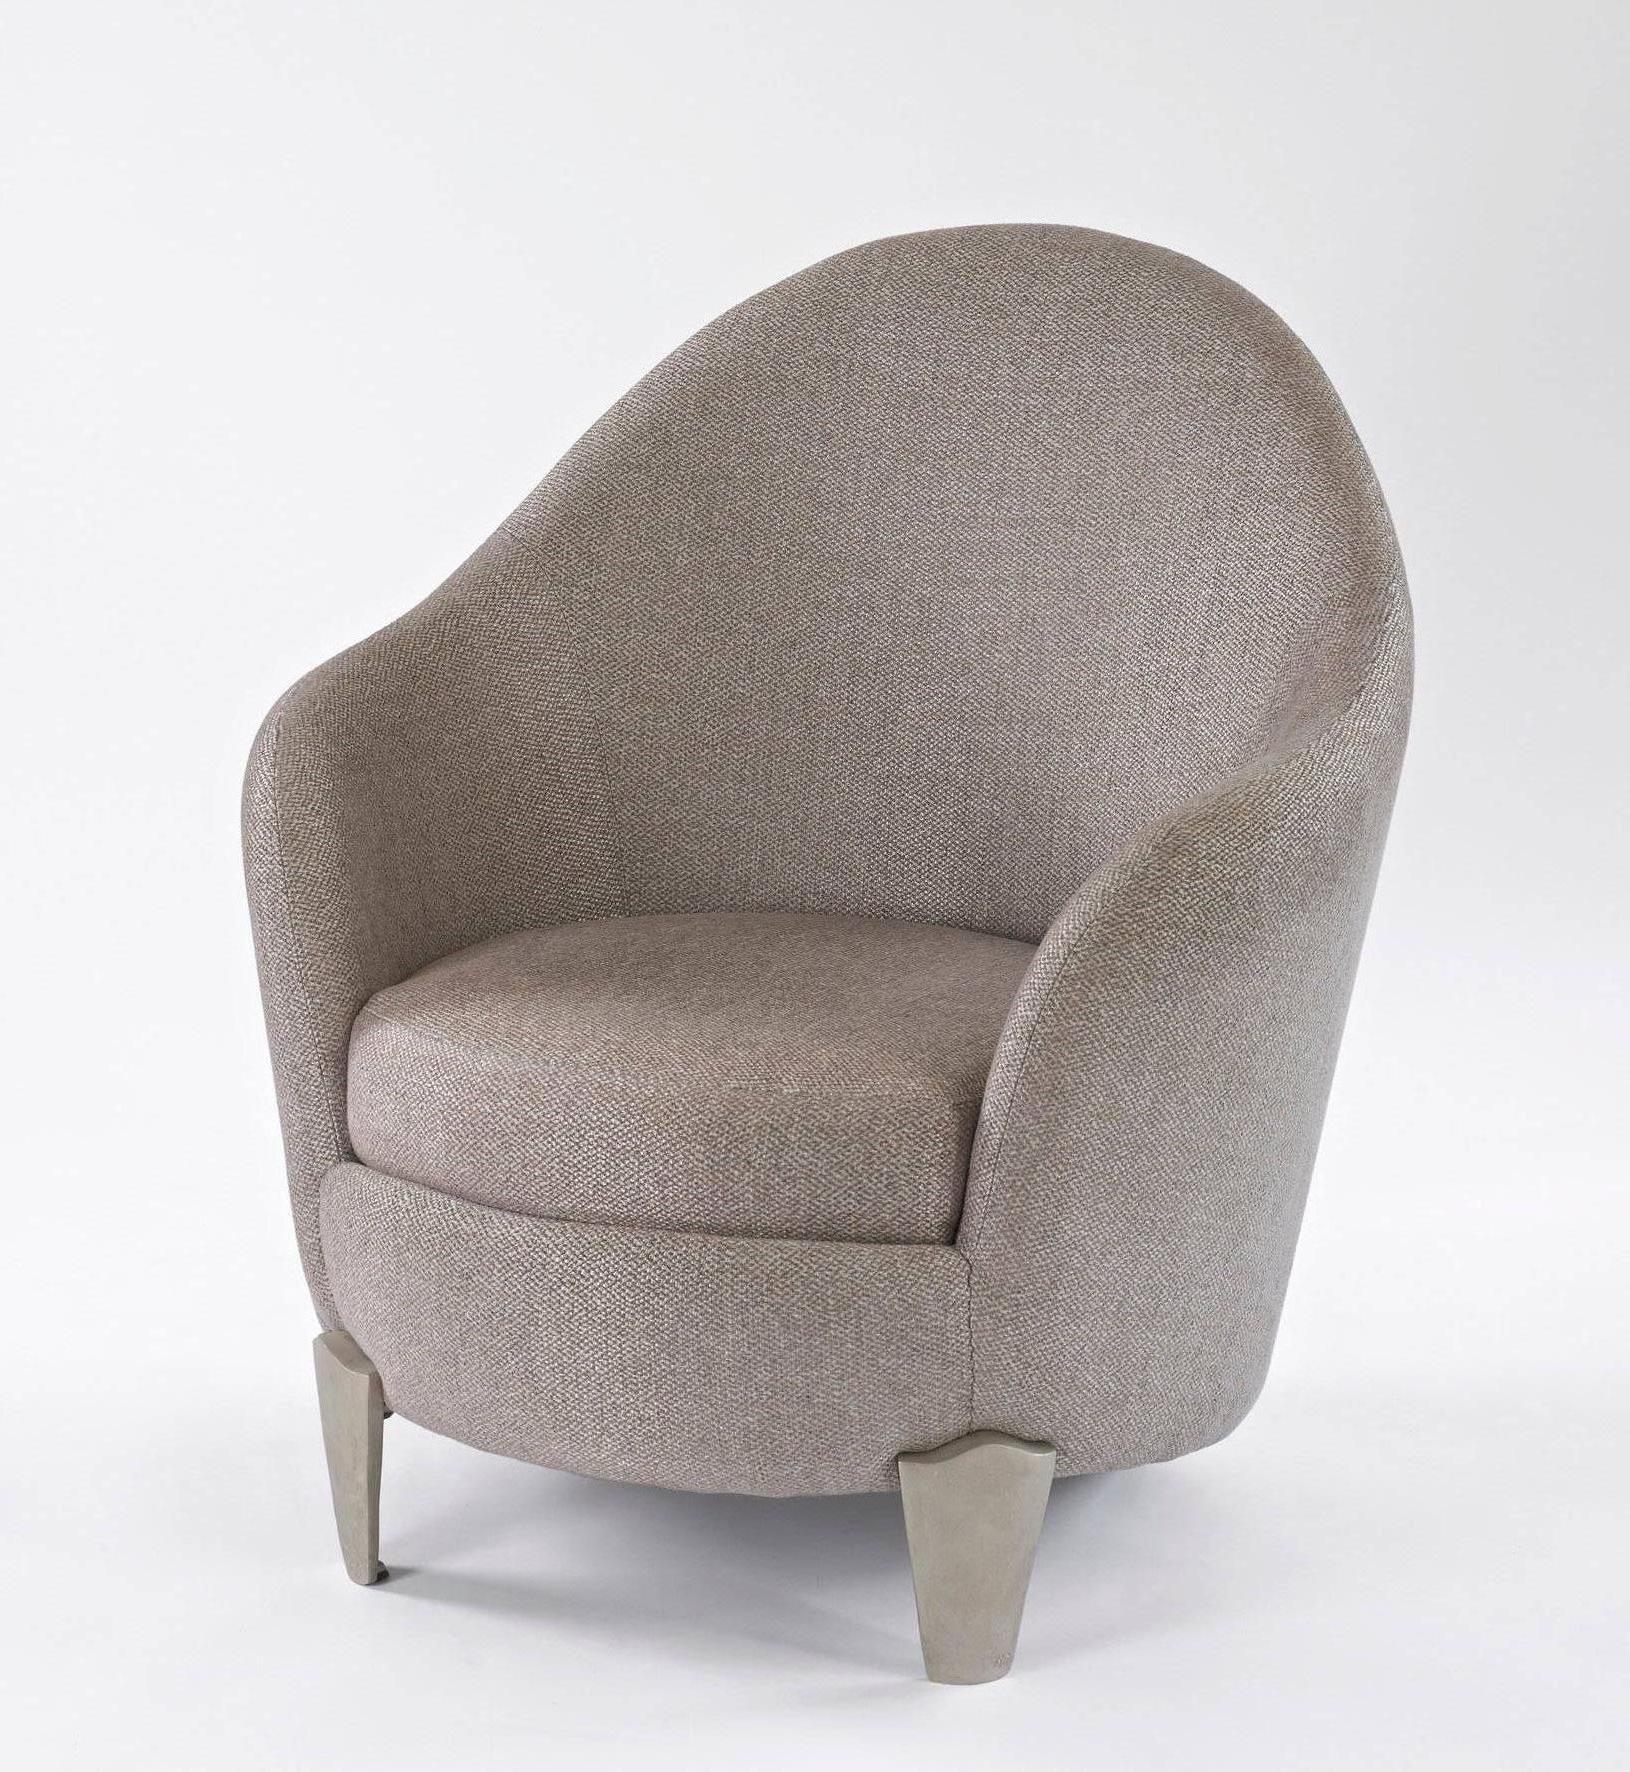 A small comfortable armchair with two bronze feet.
Our editions are from the original creations of 1995.
Fabric shown: Velvet
Interior structure made of wood.
Other fabric options are available, but require review and approval. Different fabric